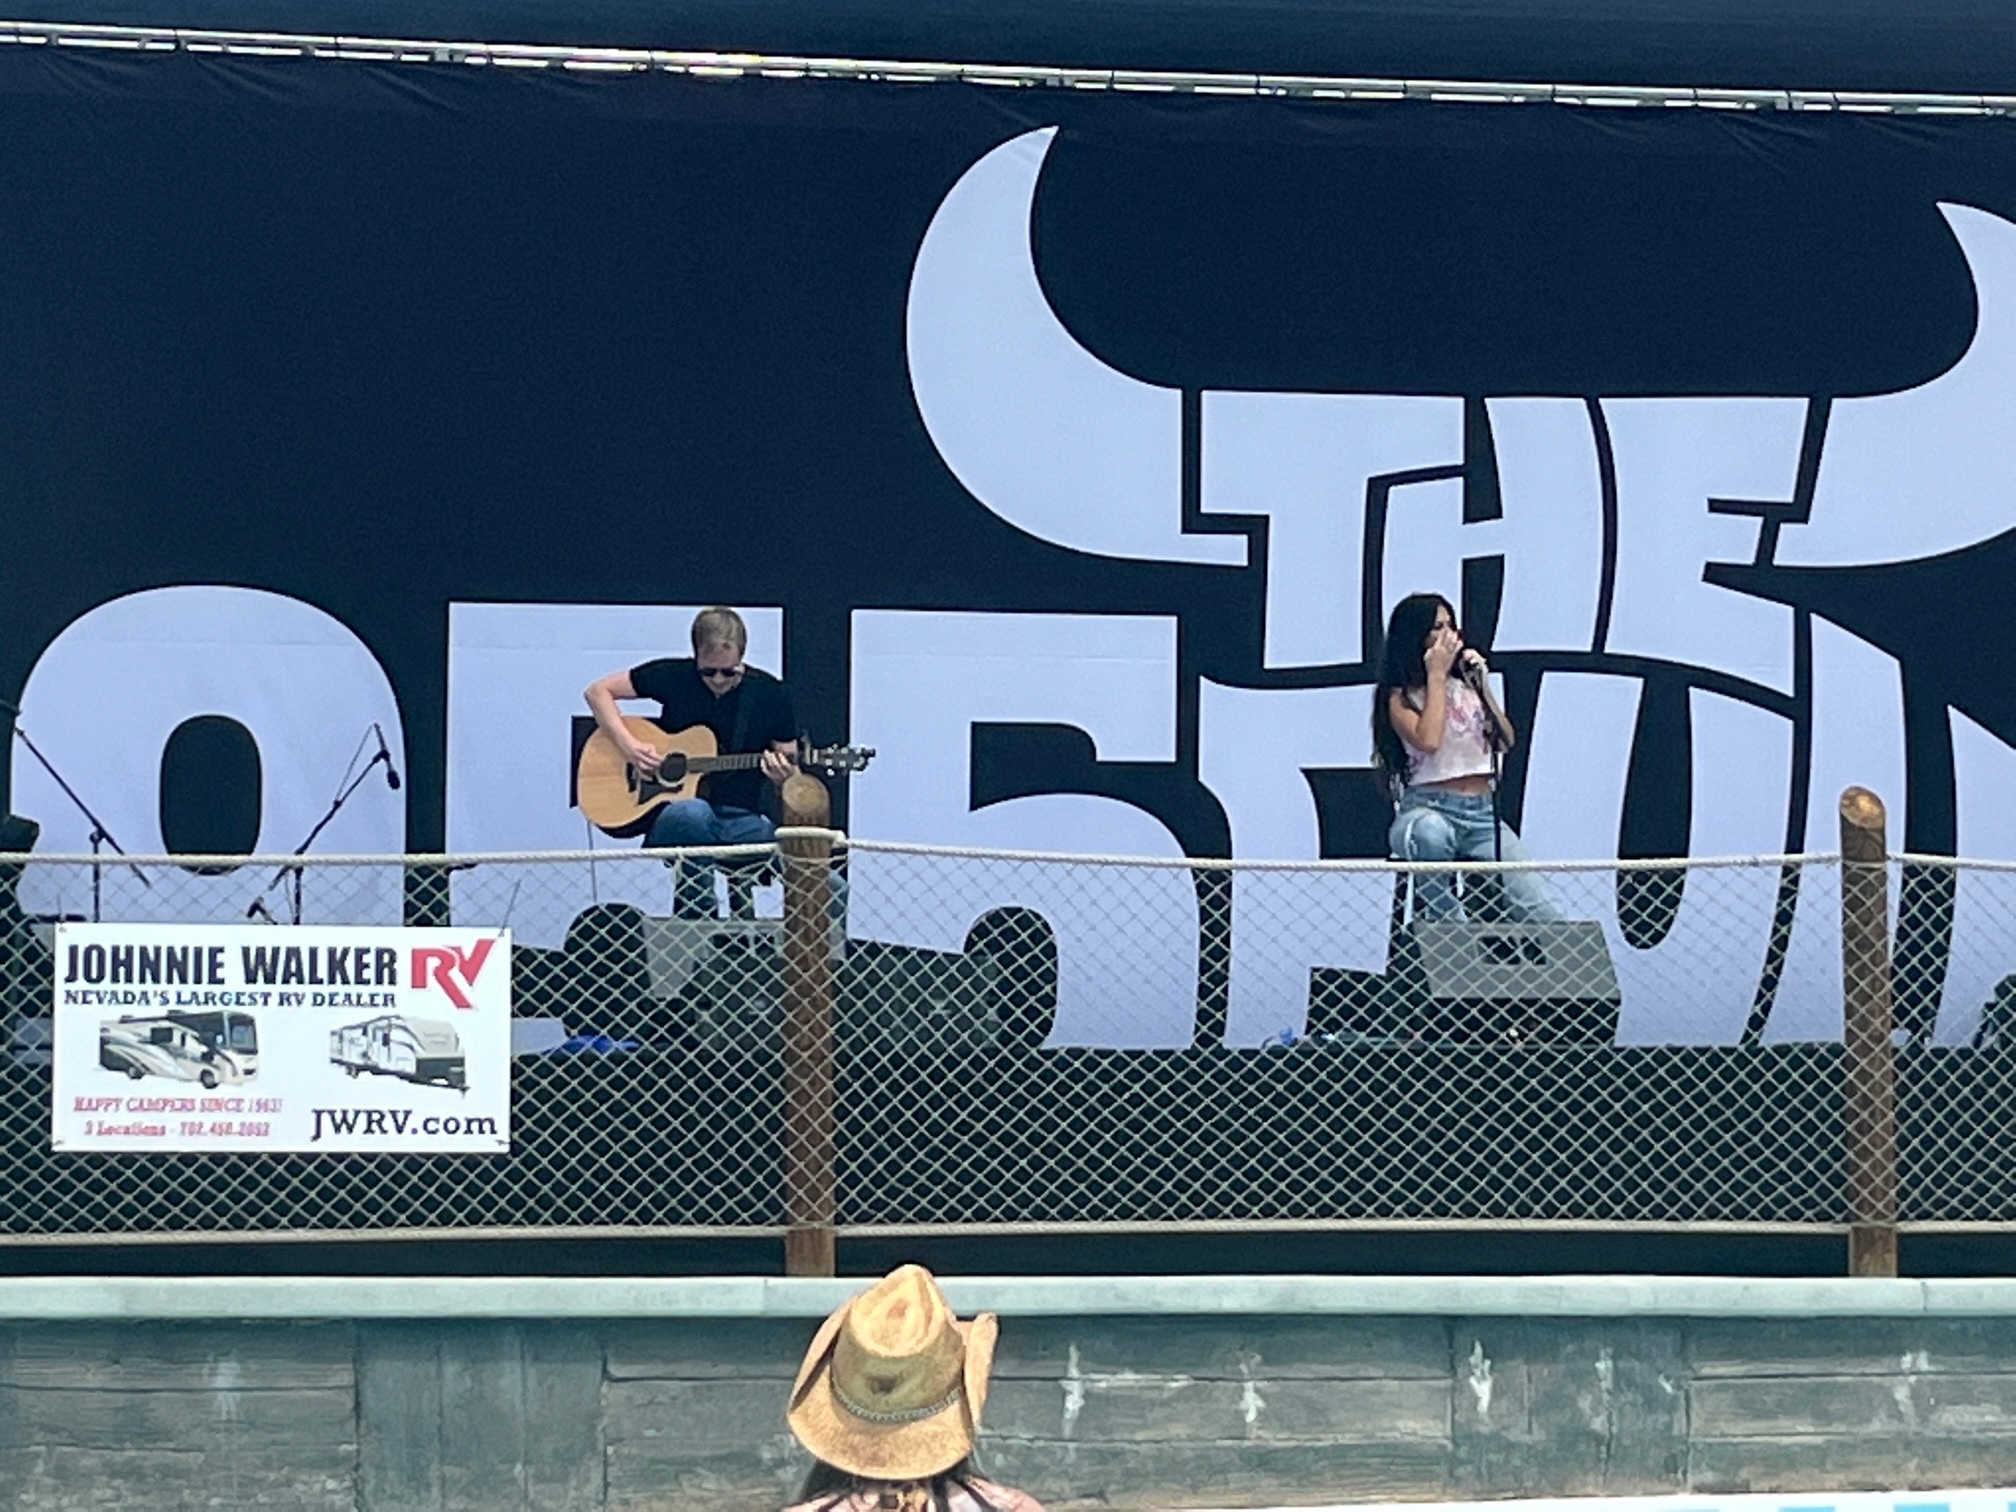 GALLERY Thompson Square, Kassi Ashton perform at 2022 Country in the